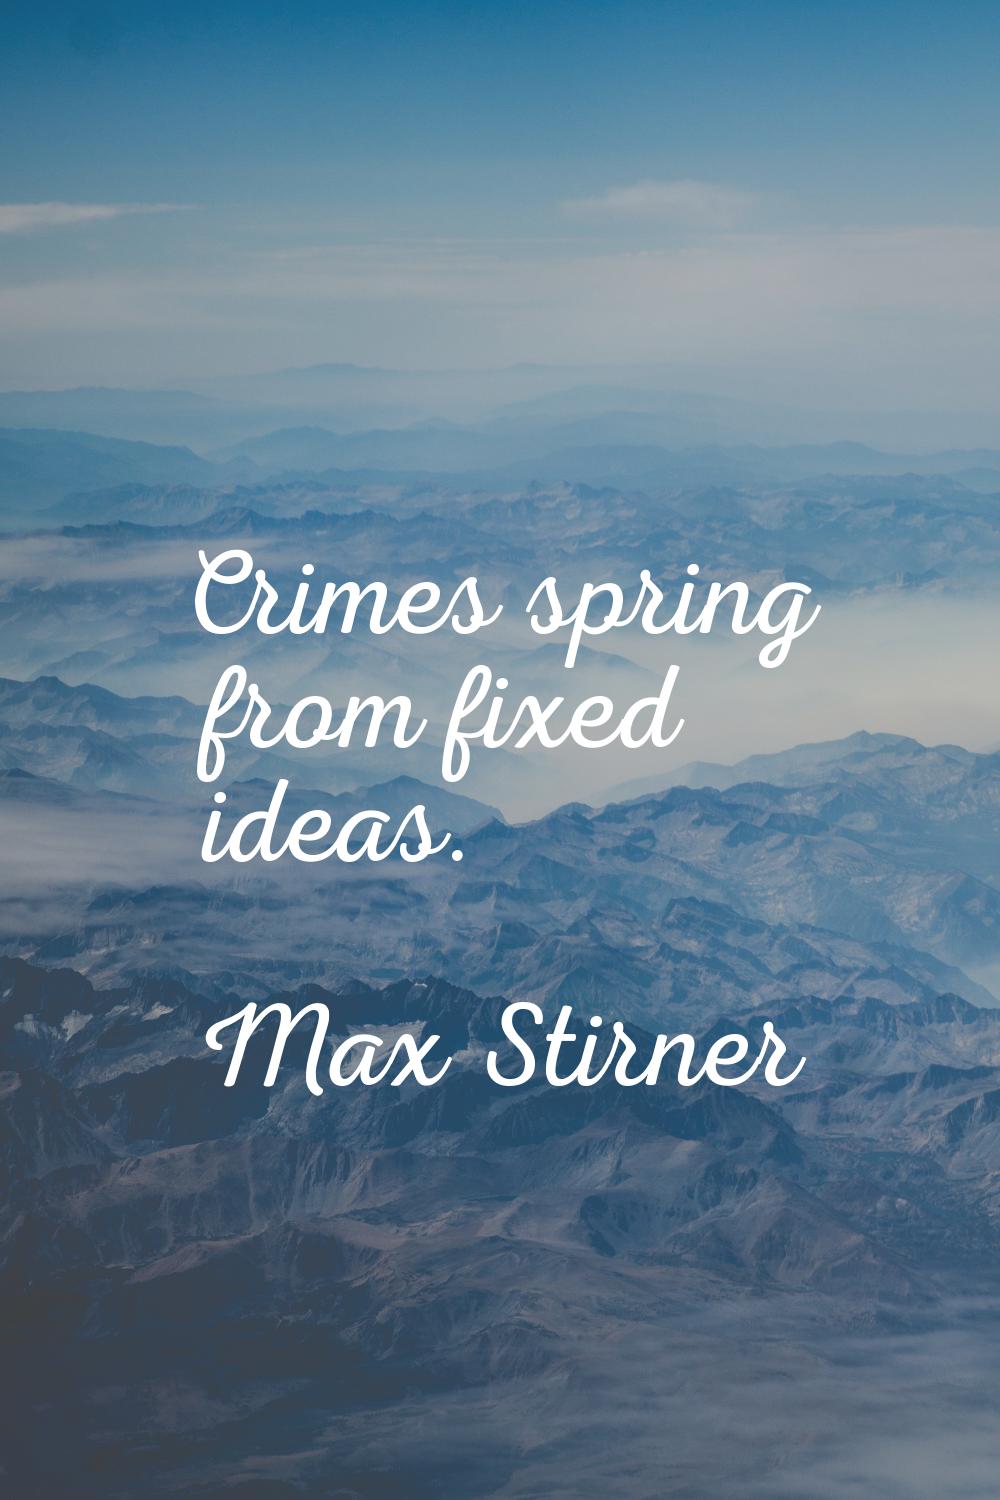 Crimes spring from fixed ideas.